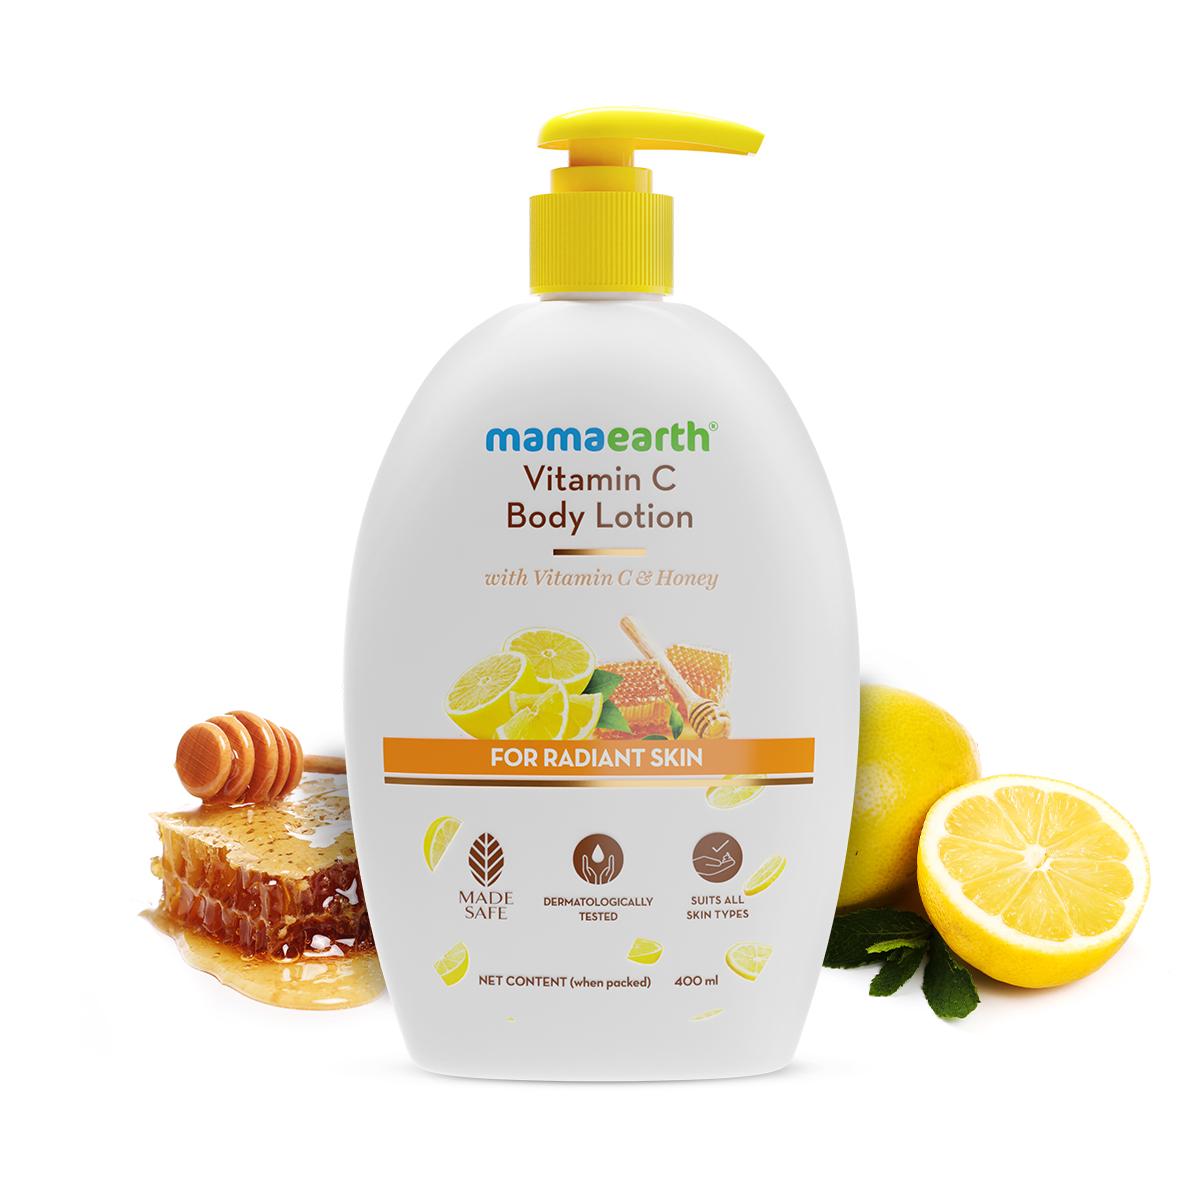 vitamin c body lotion with vitamin c and honey for radiant skin - 400 ml